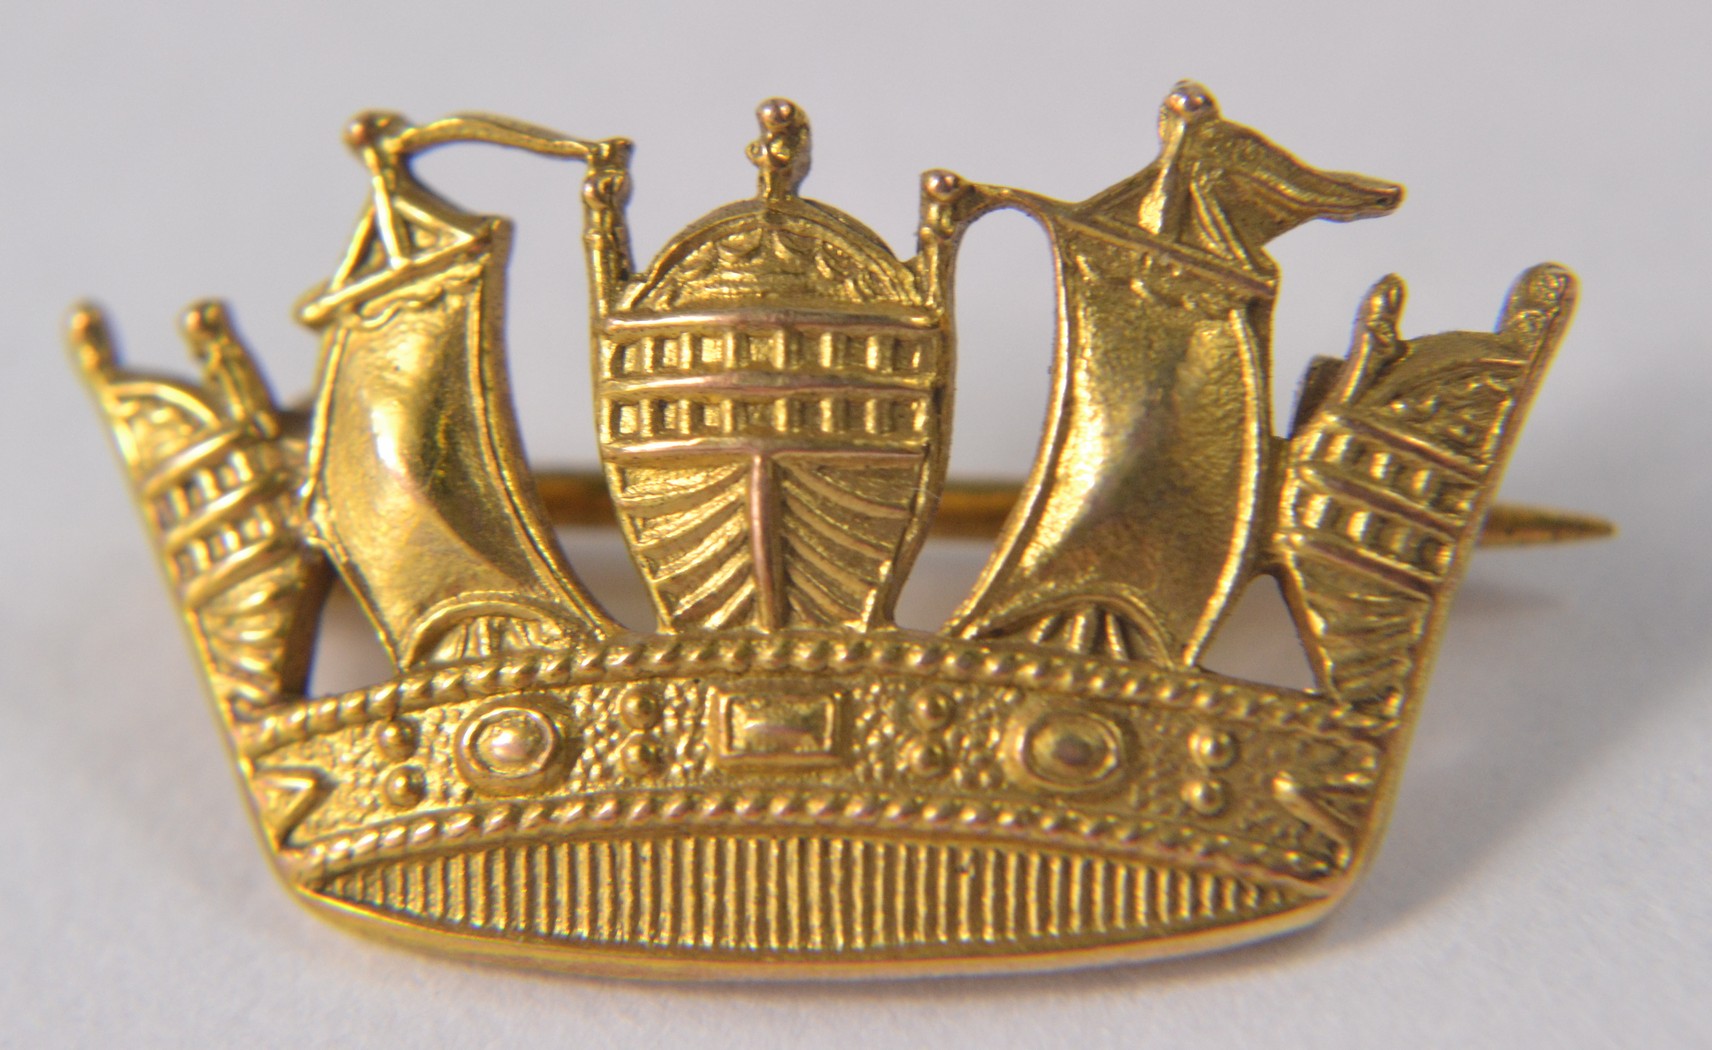 A 375 9 carat CHESTER stamped gold Viking ship style pin badge